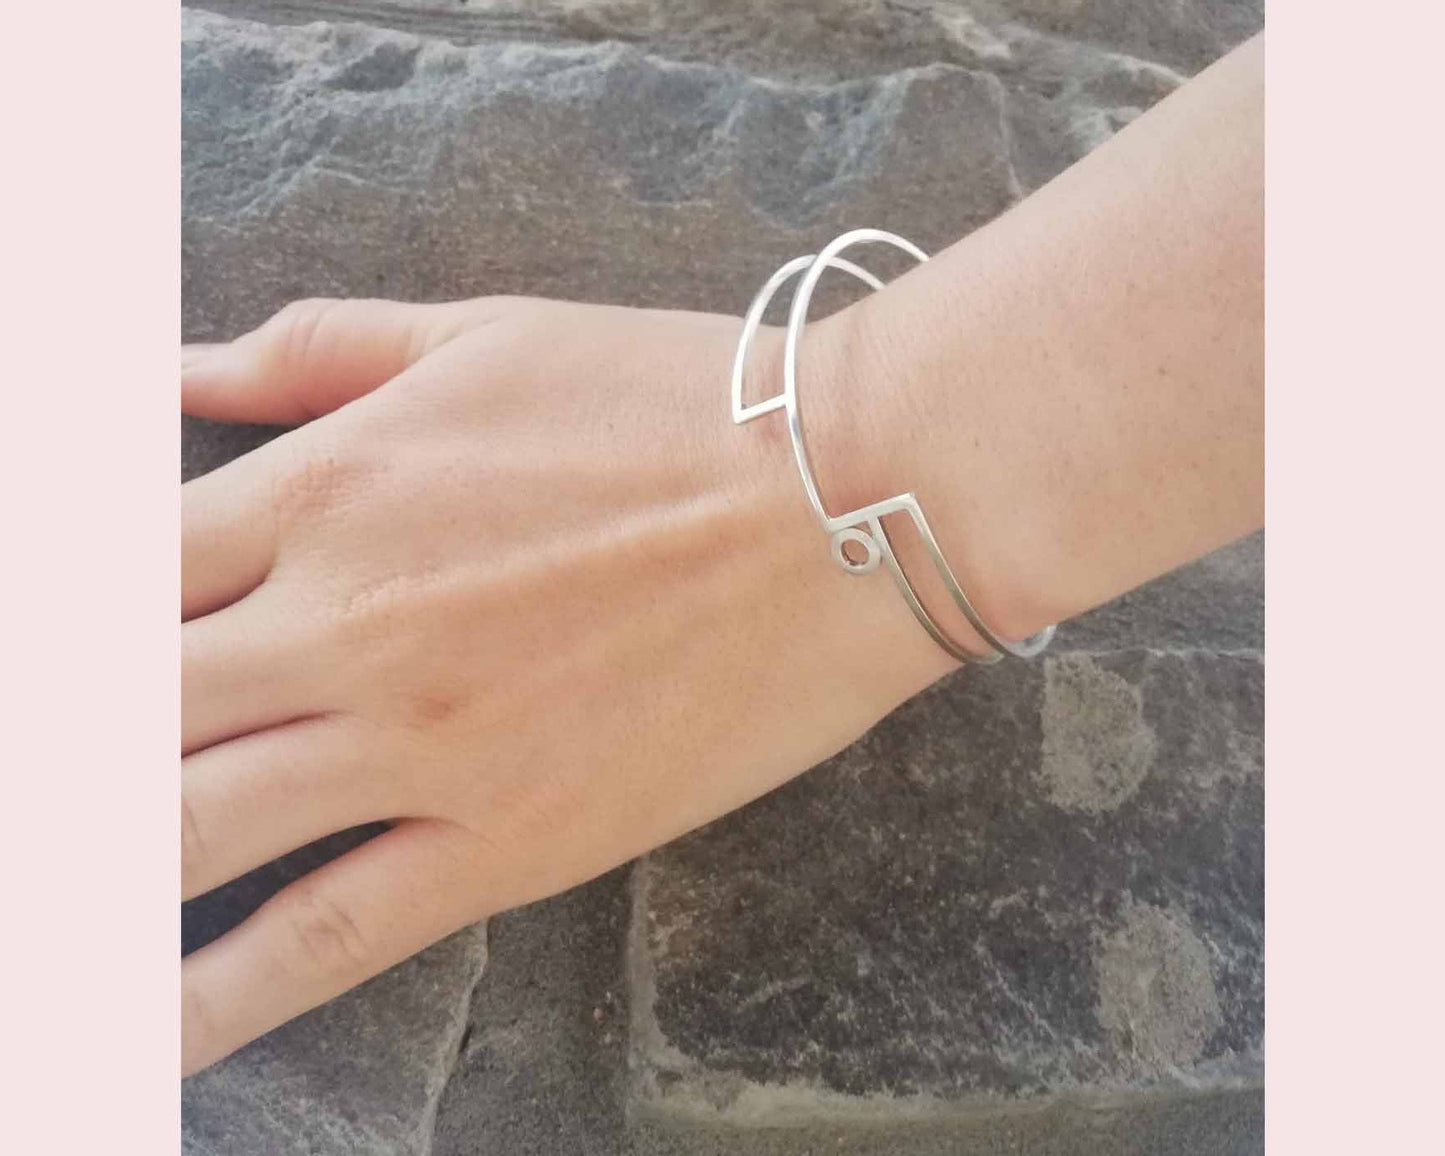 Silver linear stepped bangle with circle detail worn on wrist. Linear Bangle 2 part of Inplico Design and handmade by Roz Adams